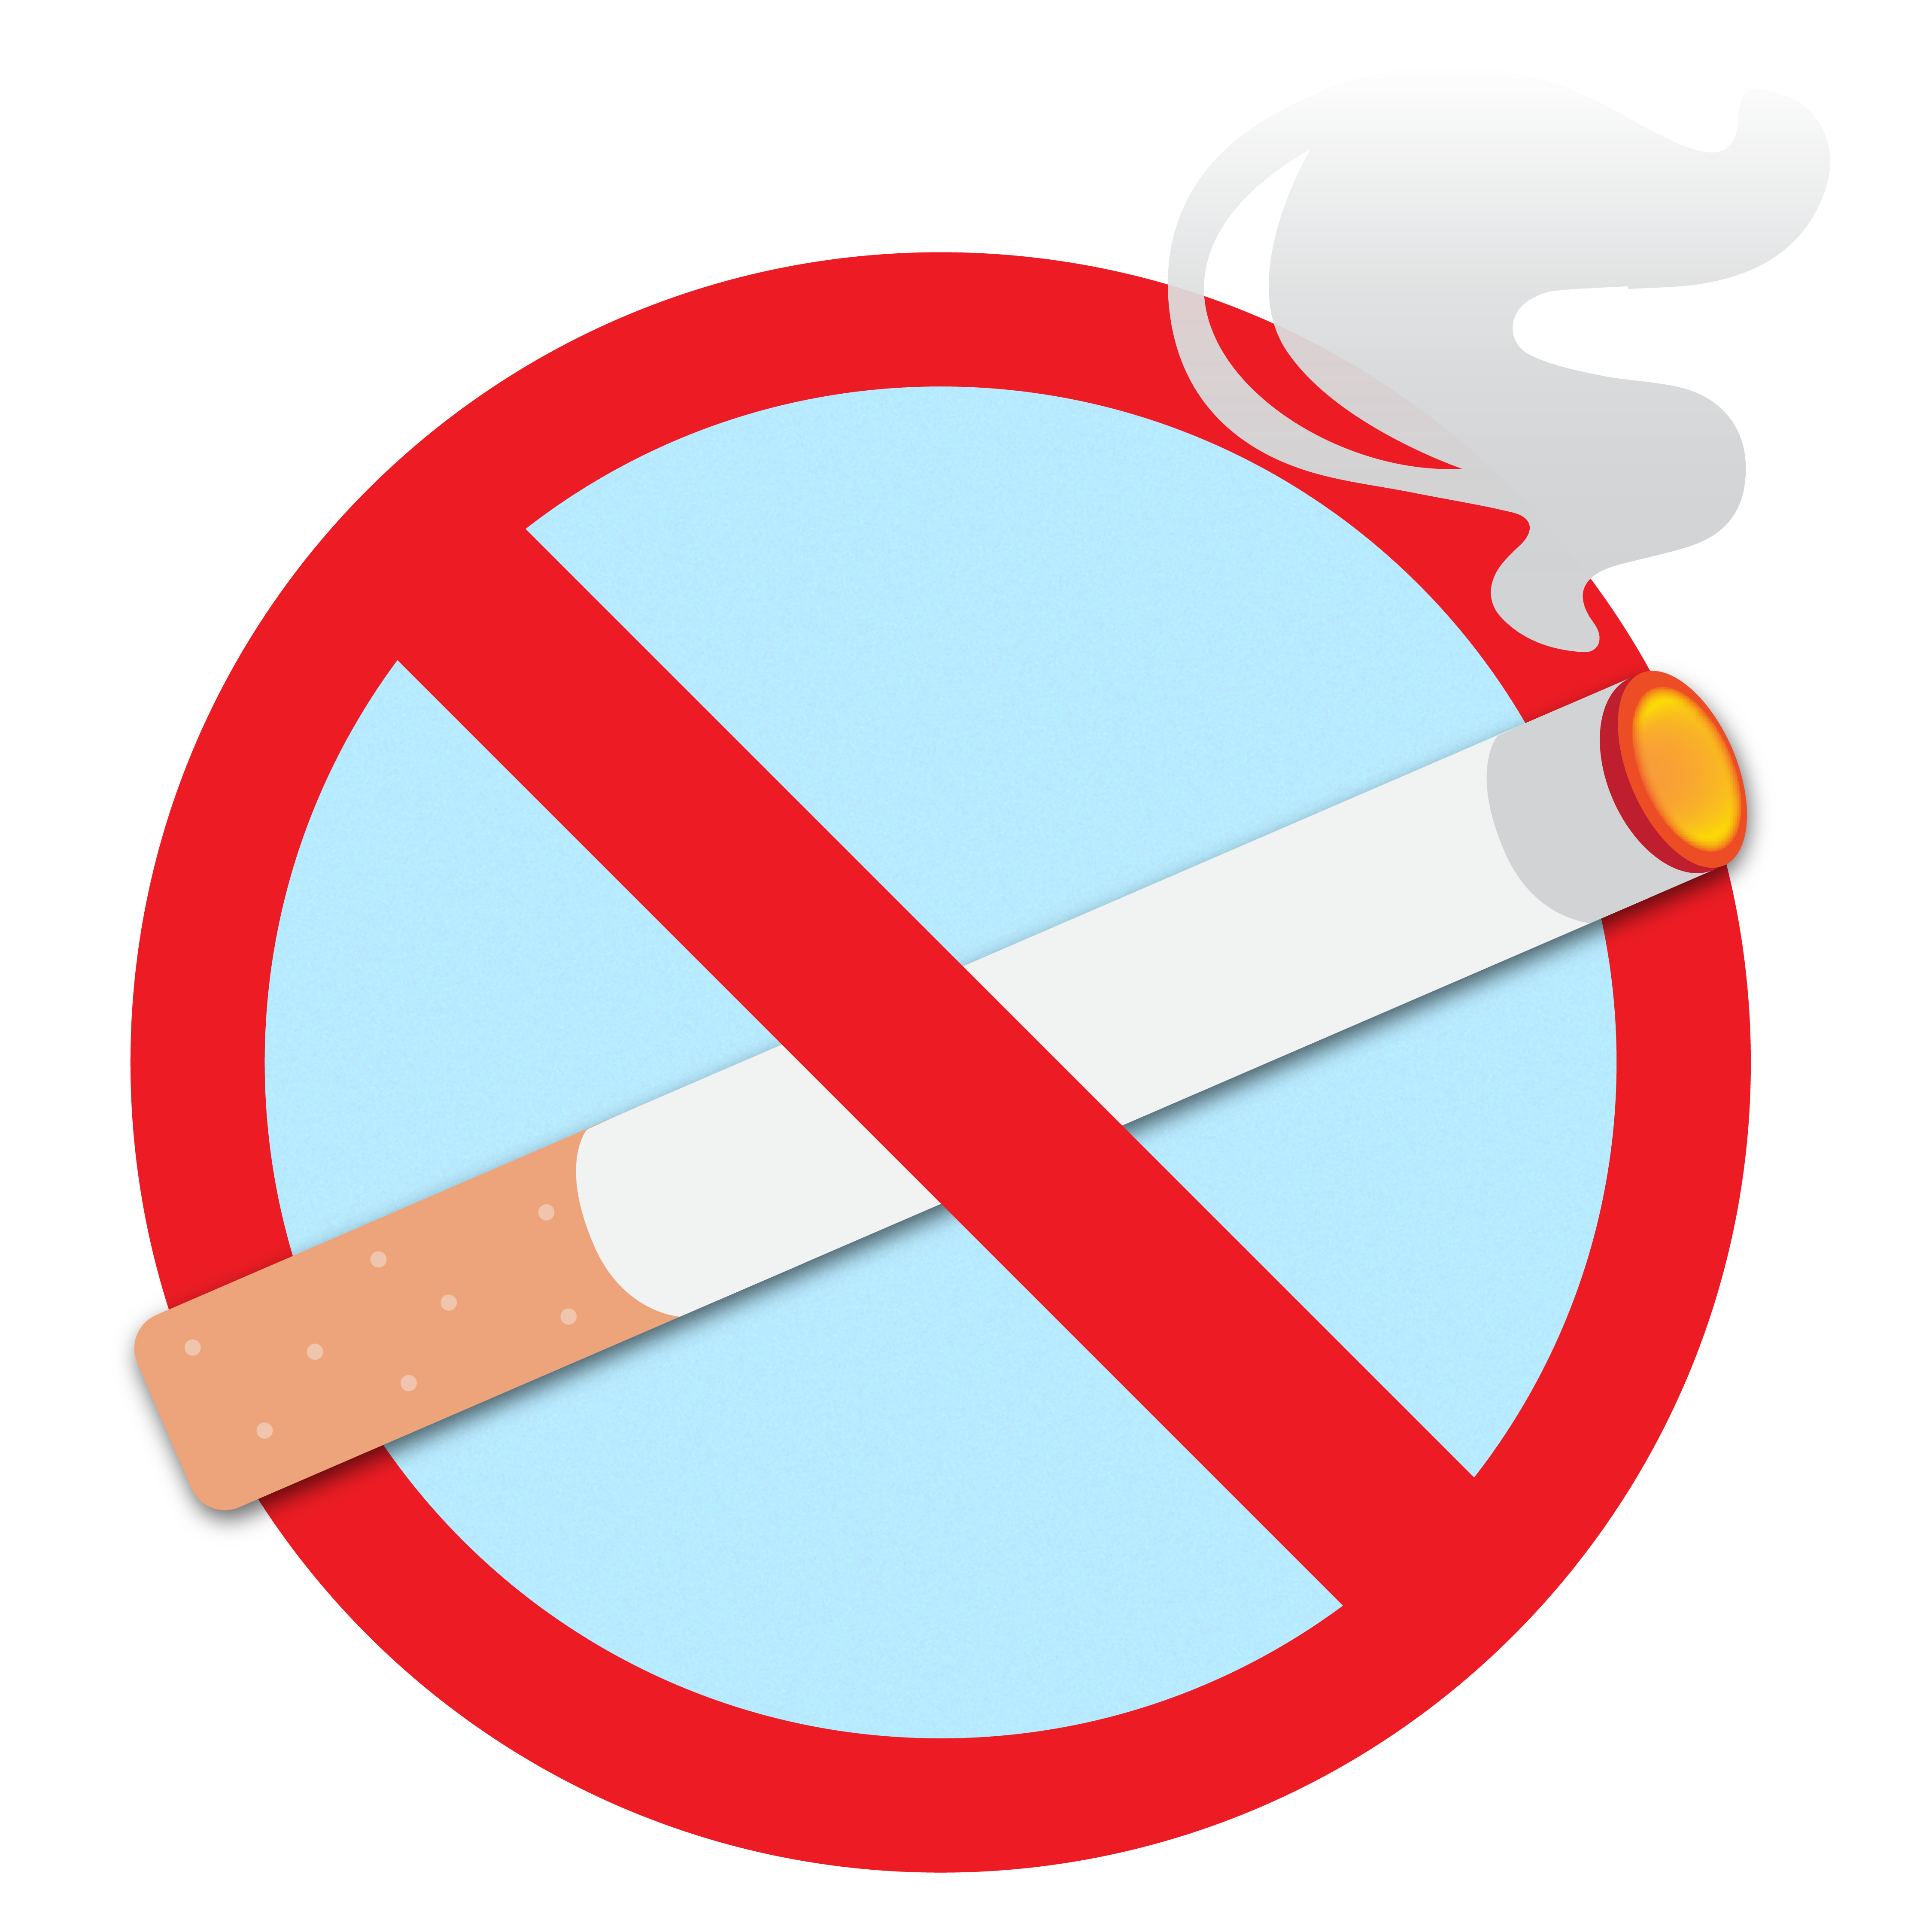 Lit cigarette with a red circle with a slash through it - no smoking sign